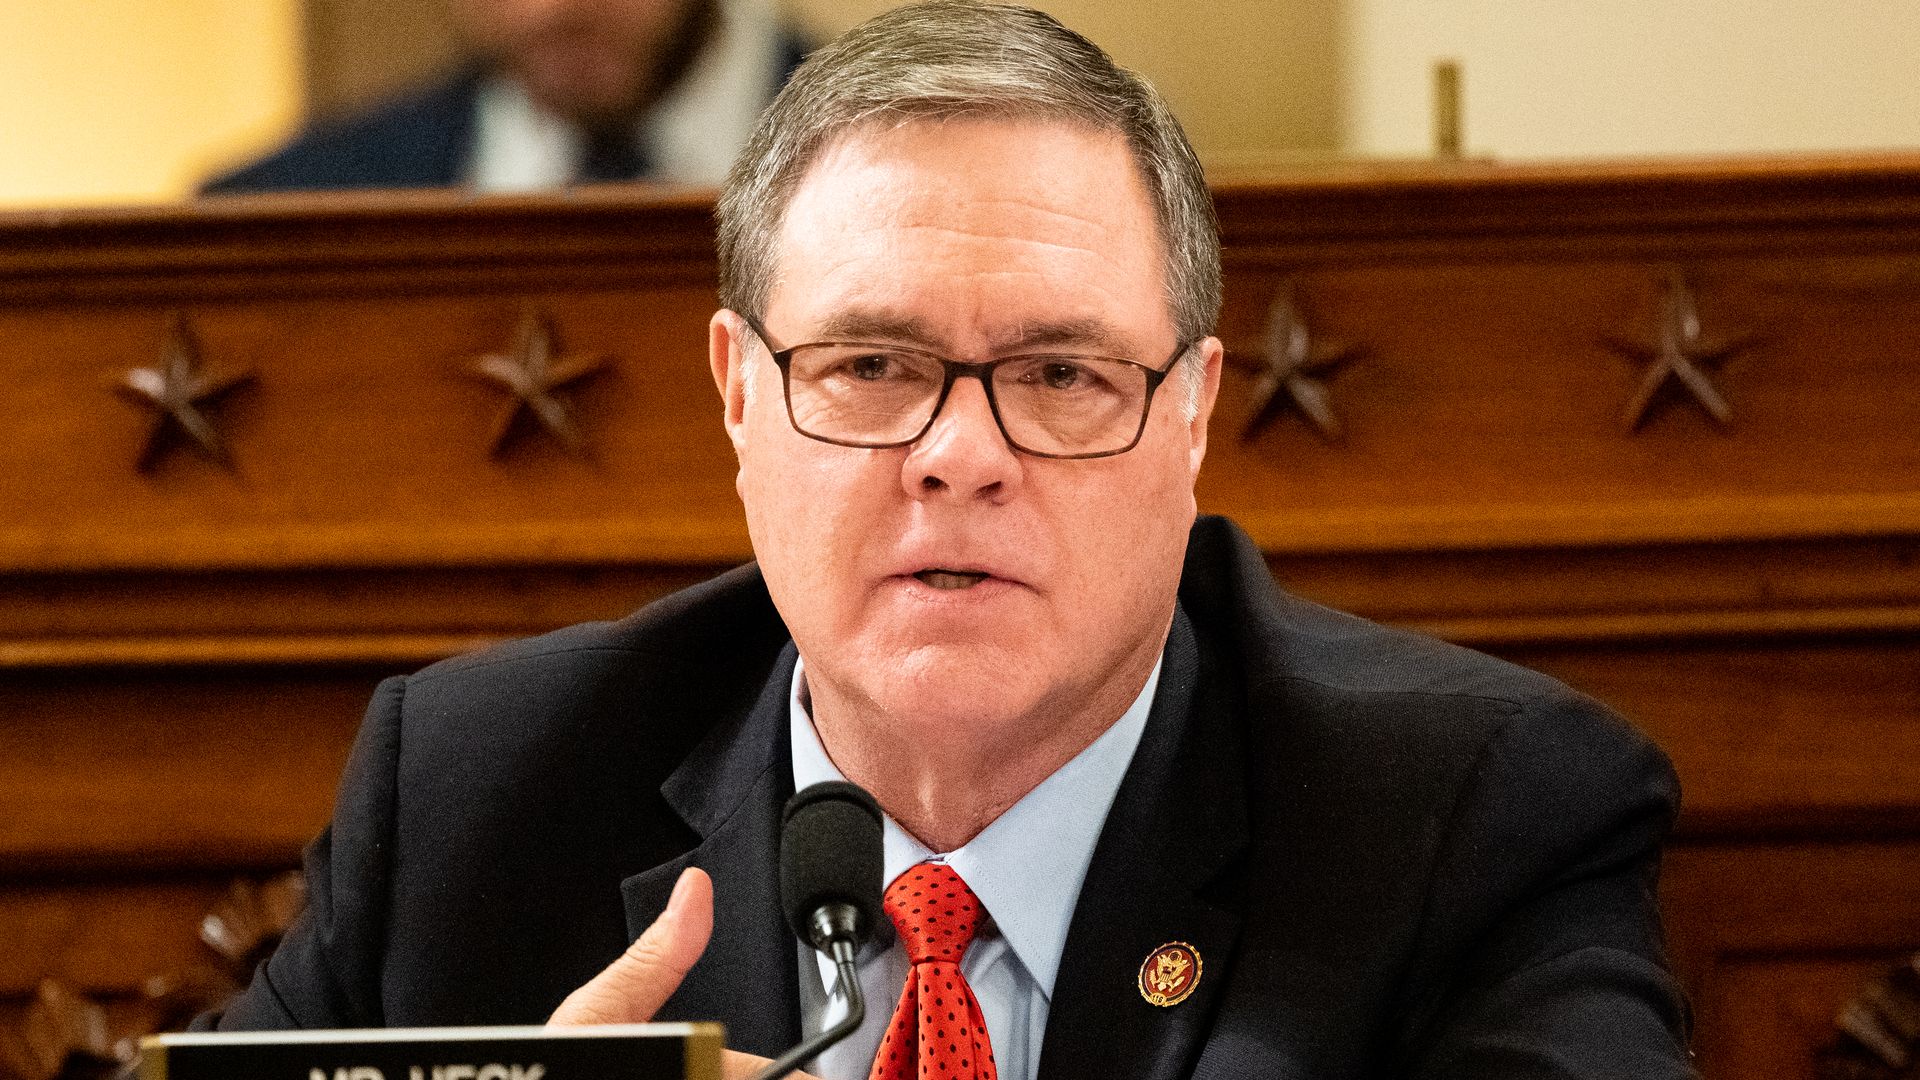 U.S. Representative Denny Heck (D-WA) attends the Open Hearings on the Impeachment of President Donald Trump of the House Intelligence Committee in Washington